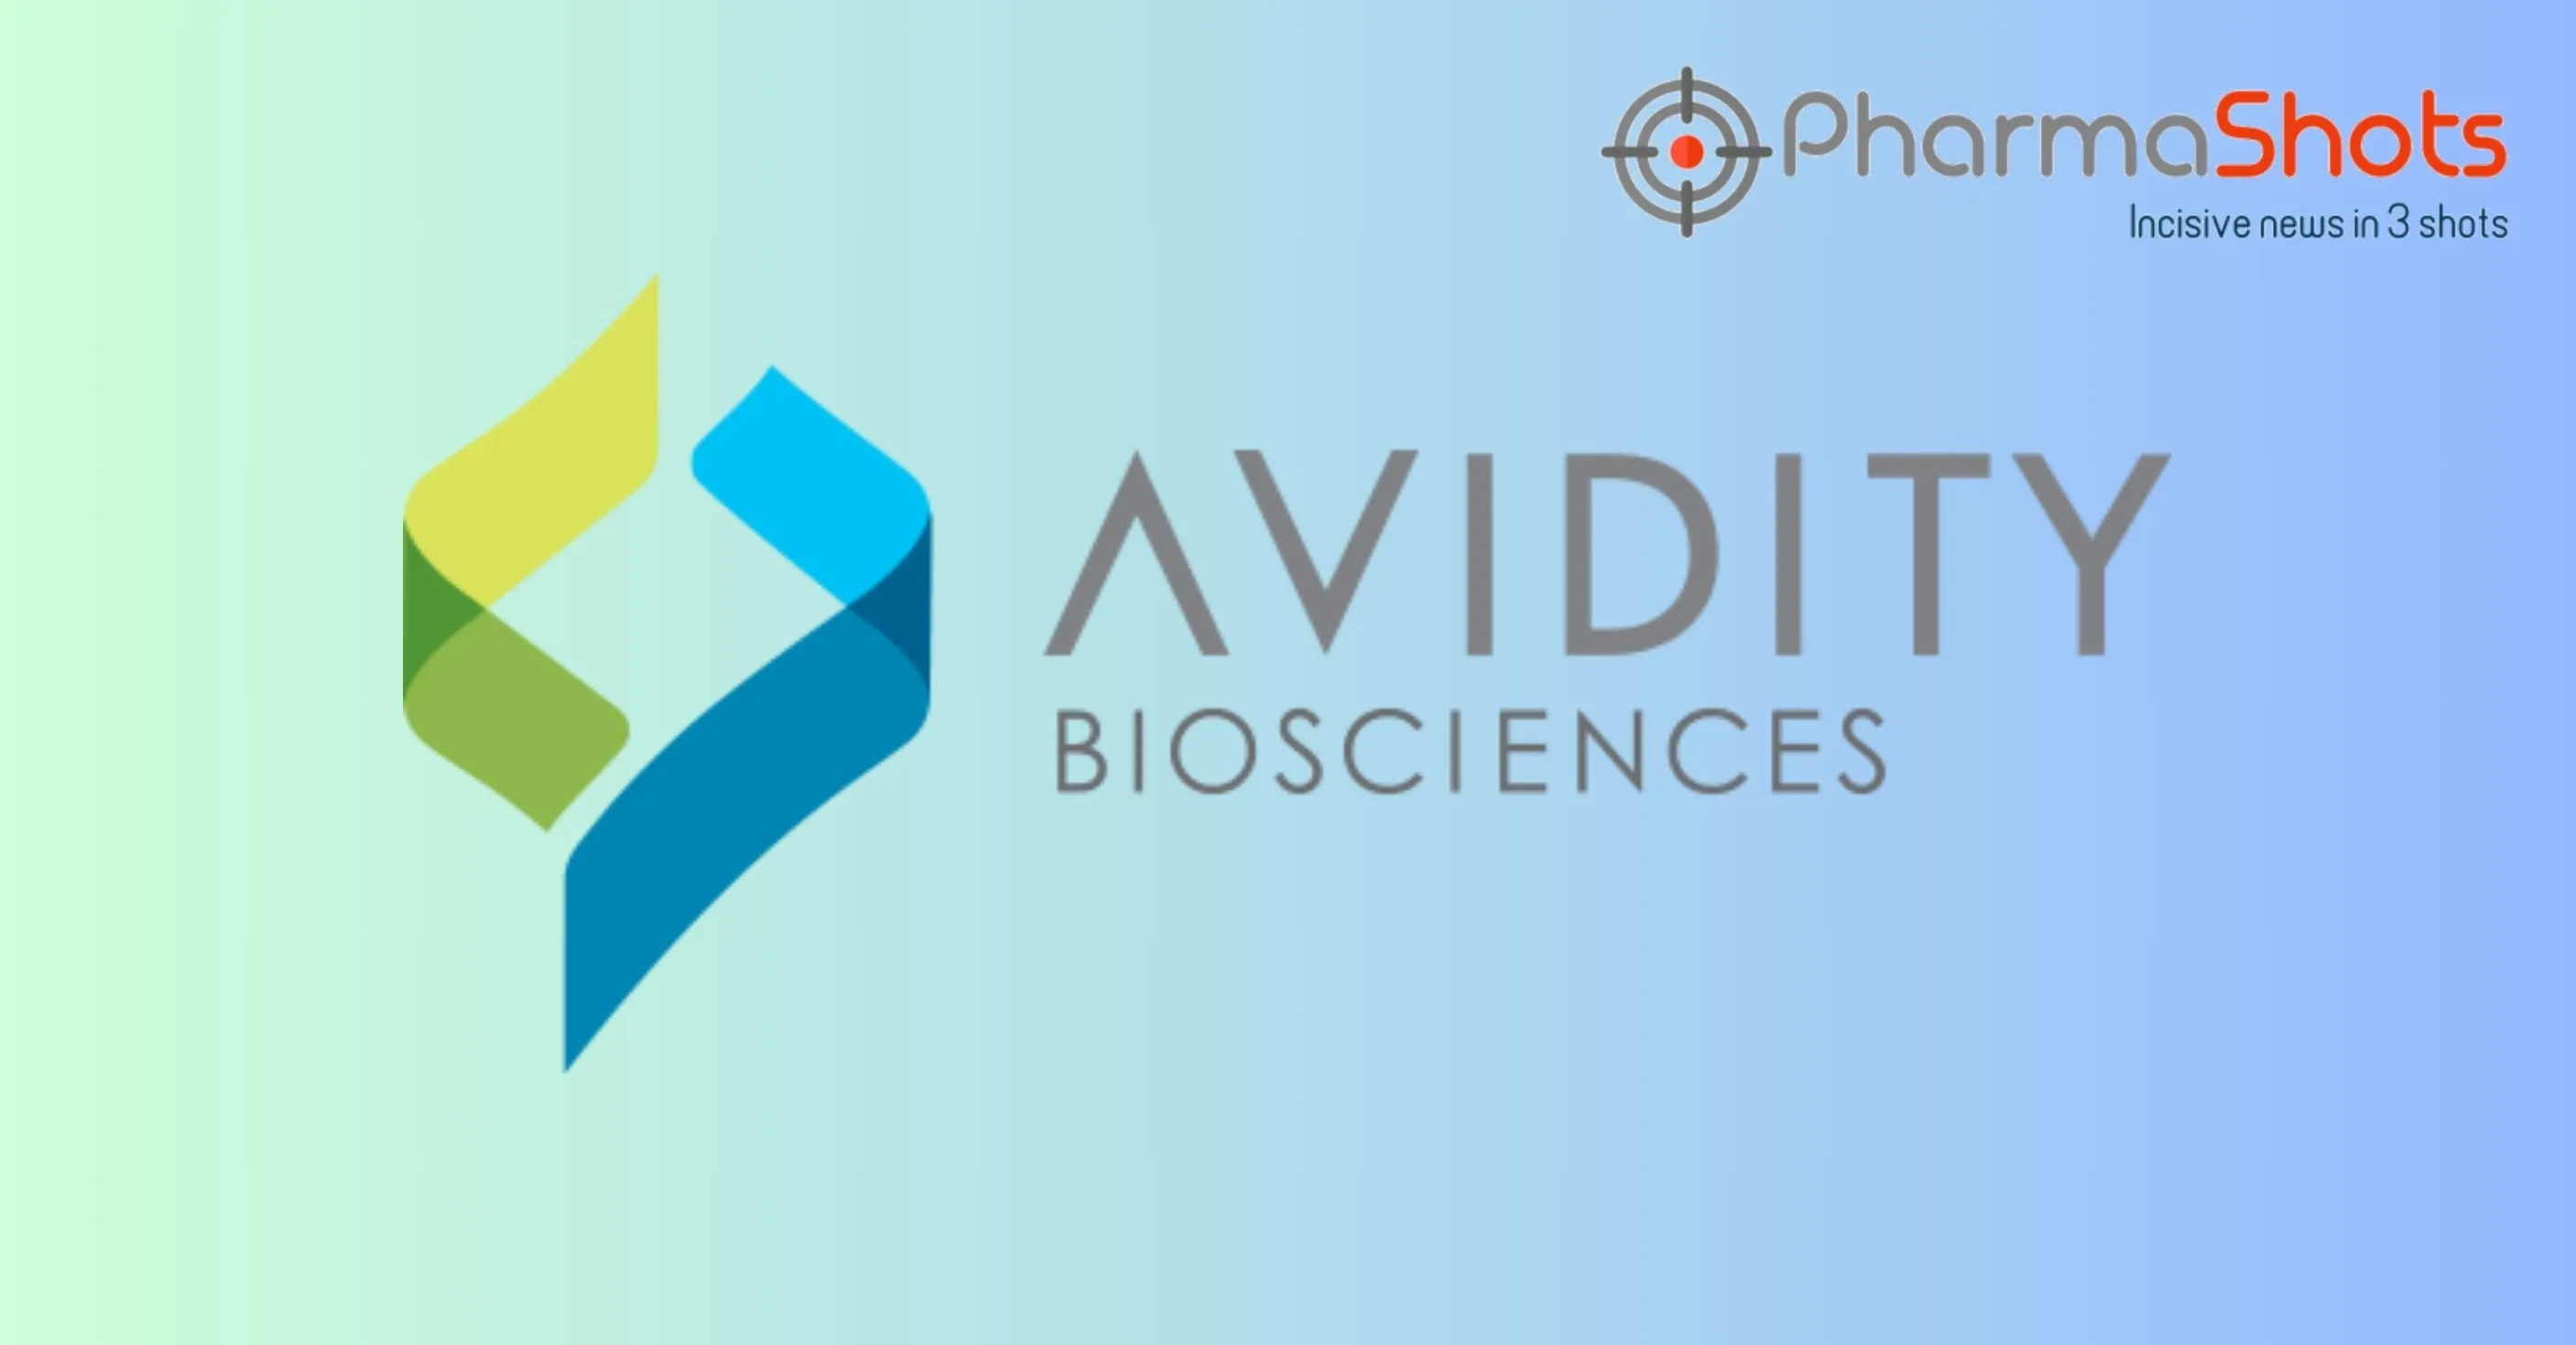 BMS and Avidity Biosciences Signs a Collaboration Agreement Worth $2.3B to Advance Cardiovascular Treatments